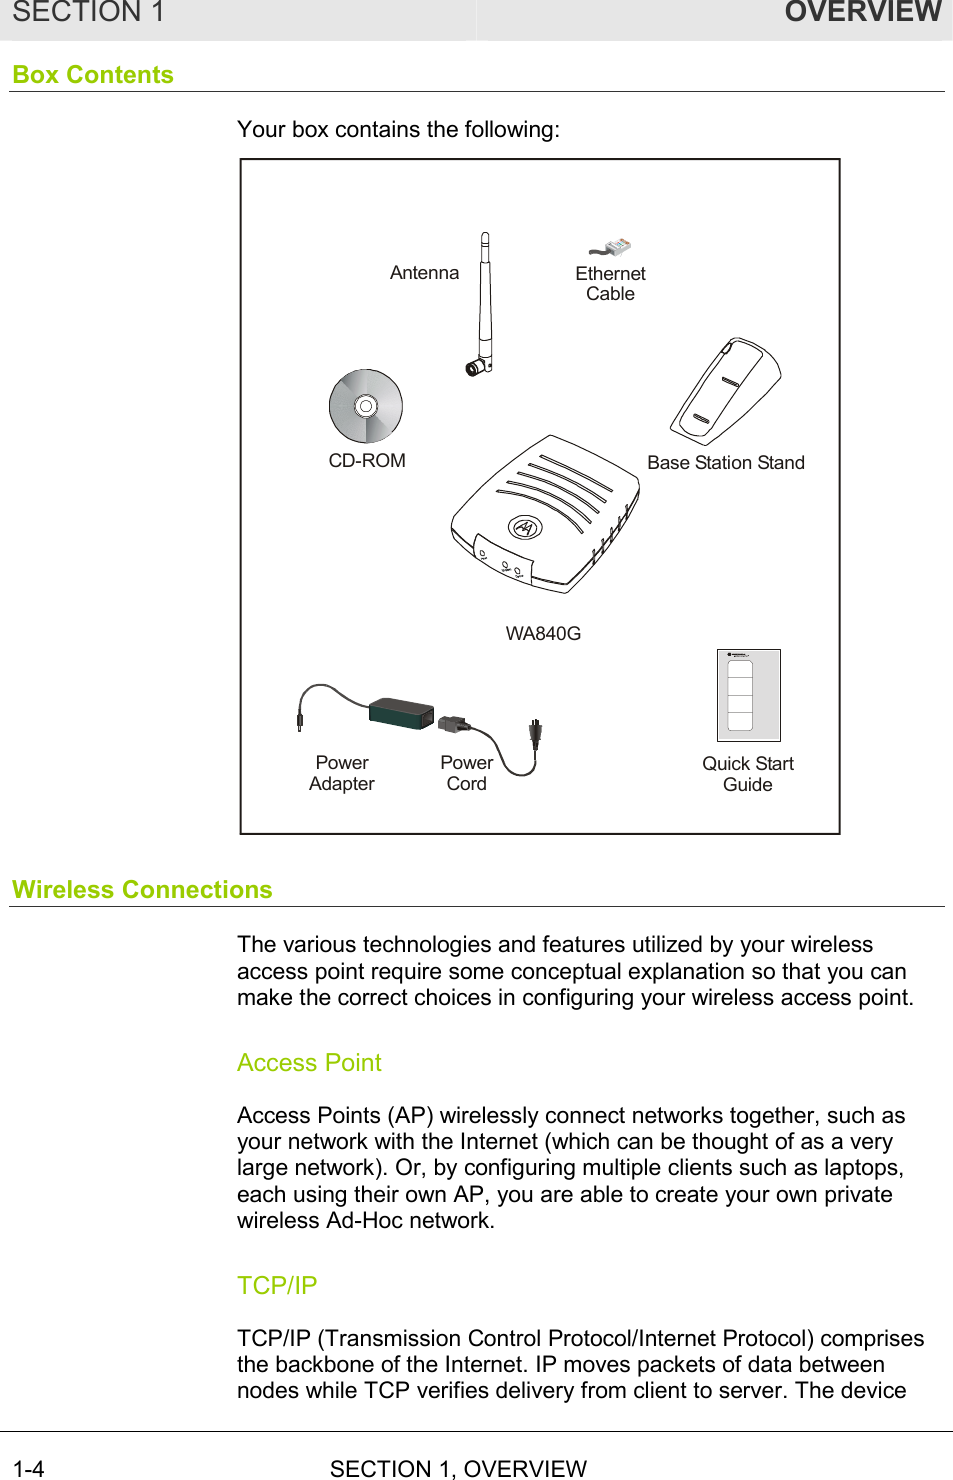 SECTION 1  OVERVIEW 1-4 SECTION 1, OVERVIEW   Box Contents Your box contains the following:  WA840GBase Station StandCD-ROMEthernet CablePower AdapterPower CordQuick StartGuideAntenna Wireless Connections The various technologies and features utilized by your wireless access point require some conceptual explanation so that you can make the correct choices in configuring your wireless access point. Access Point Access Points (AP) wirelessly connect networks together, such as your network with the Internet (which can be thought of as a very large network). Or, by configuring multiple clients such as laptops, each using their own AP, you are able to create your own private wireless Ad-Hoc network. TCP/IP TCP/IP (Transmission Control Protocol/Internet Protocol) comprises the backbone of the Internet. IP moves packets of data between nodes while TCP verifies delivery from client to server. The device 